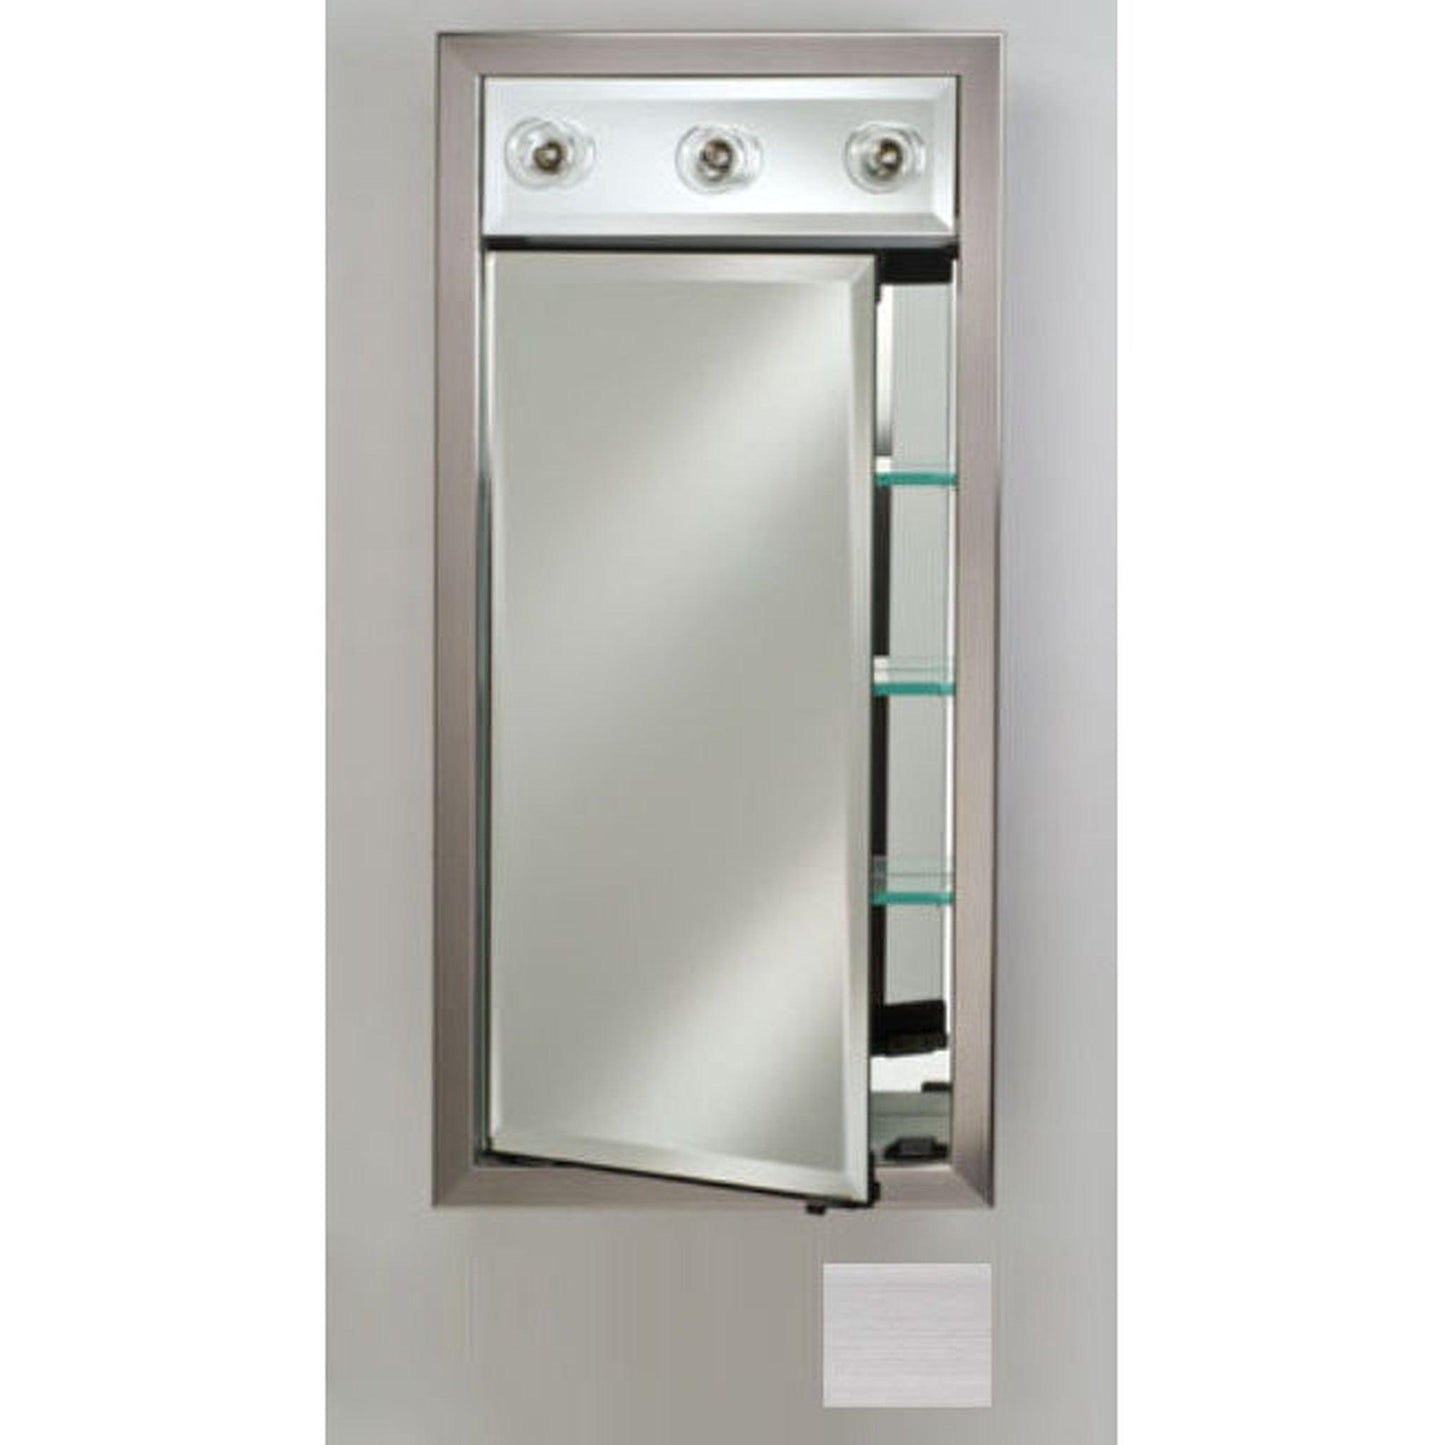 Afina Signature 17" x 40" Soho Stainless Recessed Left Hinged Single Door Medicine Cabinet With Contemporary Lights